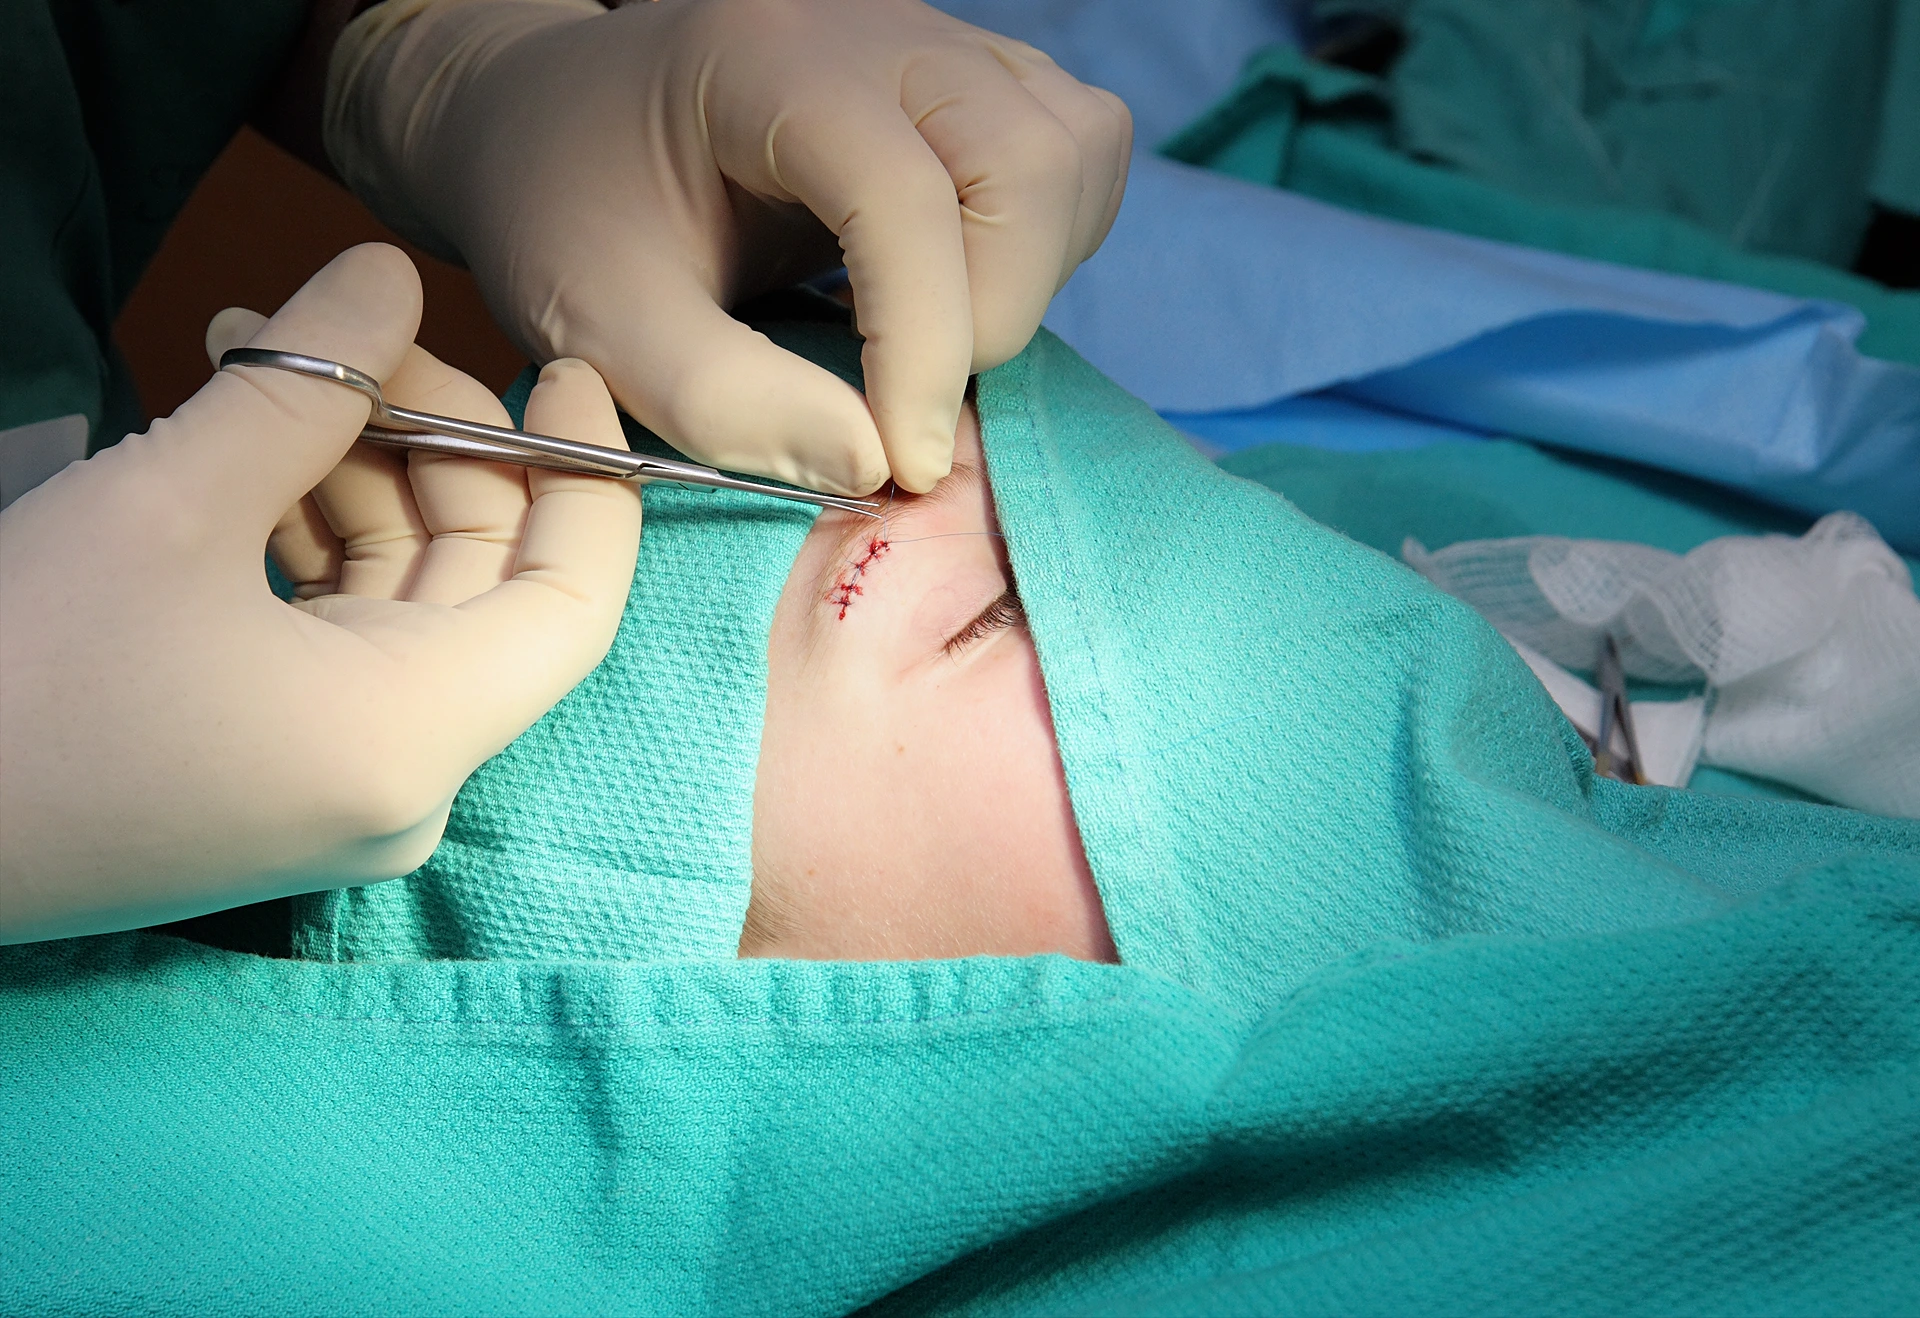 Two surgeons with gloved hands perform stitches on a person's eyebrow with surgical tools, surrounded by blue surgical drapes.